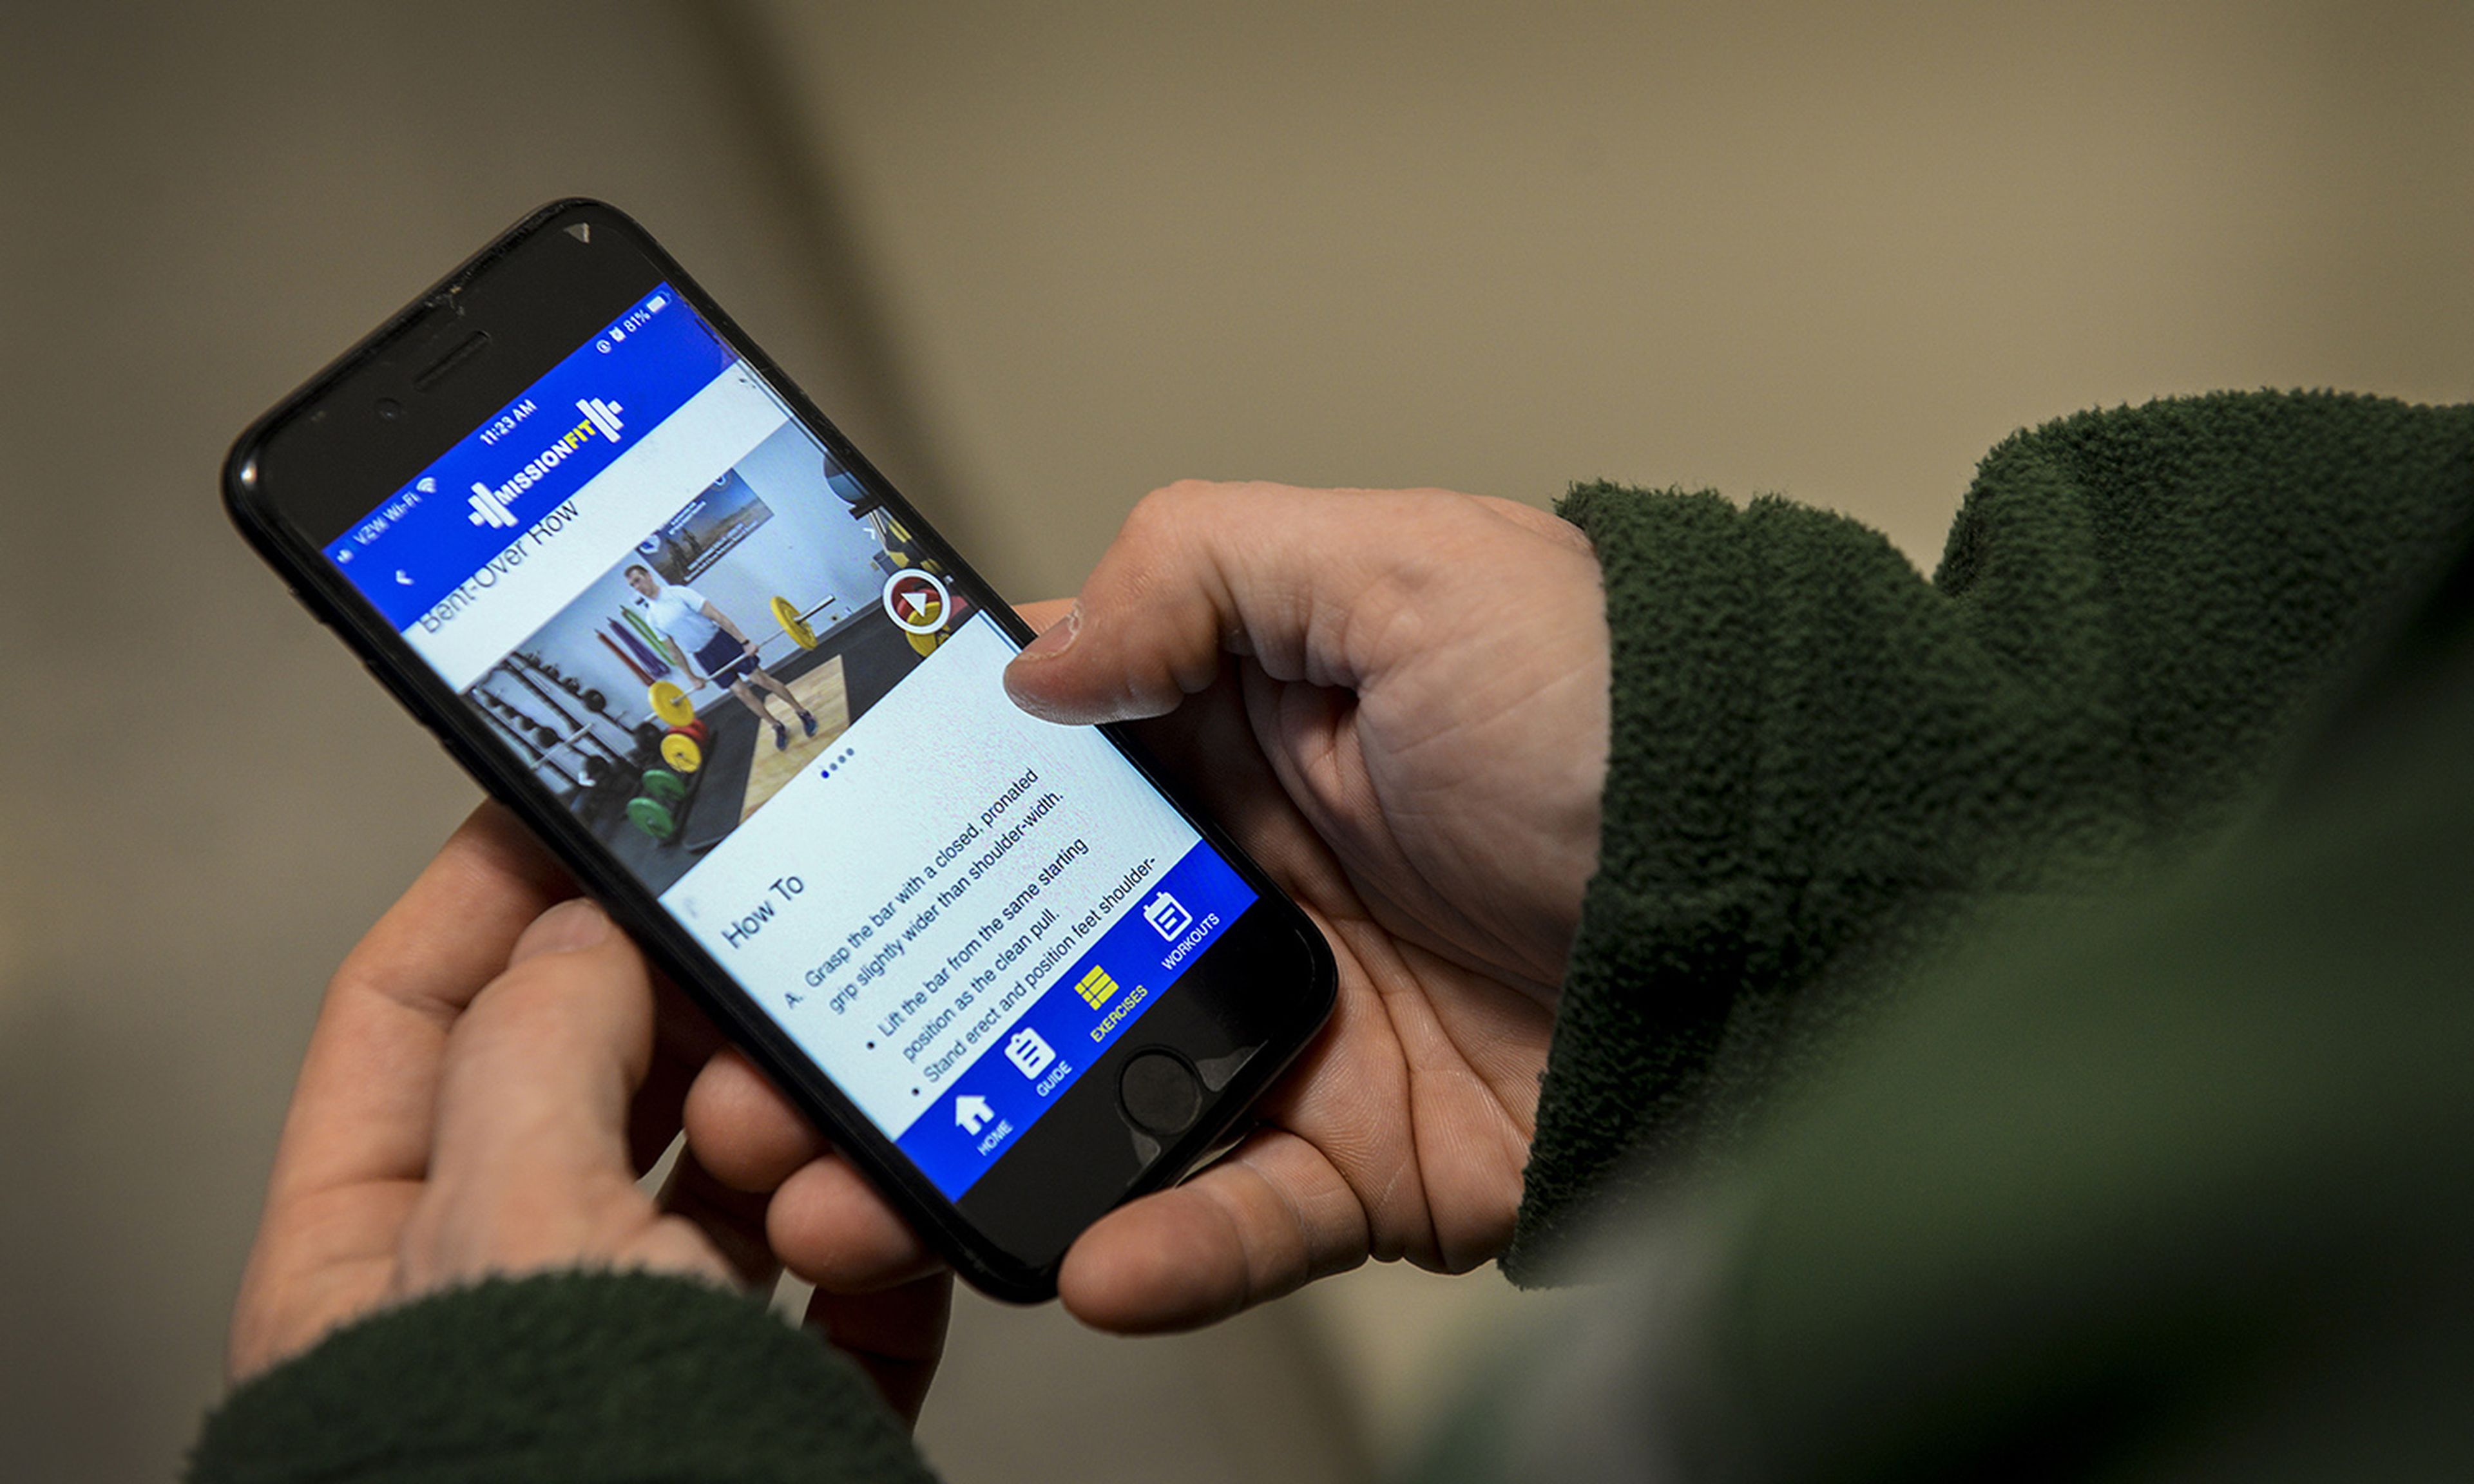 Lawmakers aim to close security and privacy loopholes when it comes to regulating health apps. Pictured: A smartphone user navigates the Defense Health Agency’s health and wellness app, Air Force MissionFit, at Hanscom Air Force Base, Mass., Feb. 13, 2020. (Lauren Russell/Air Force)